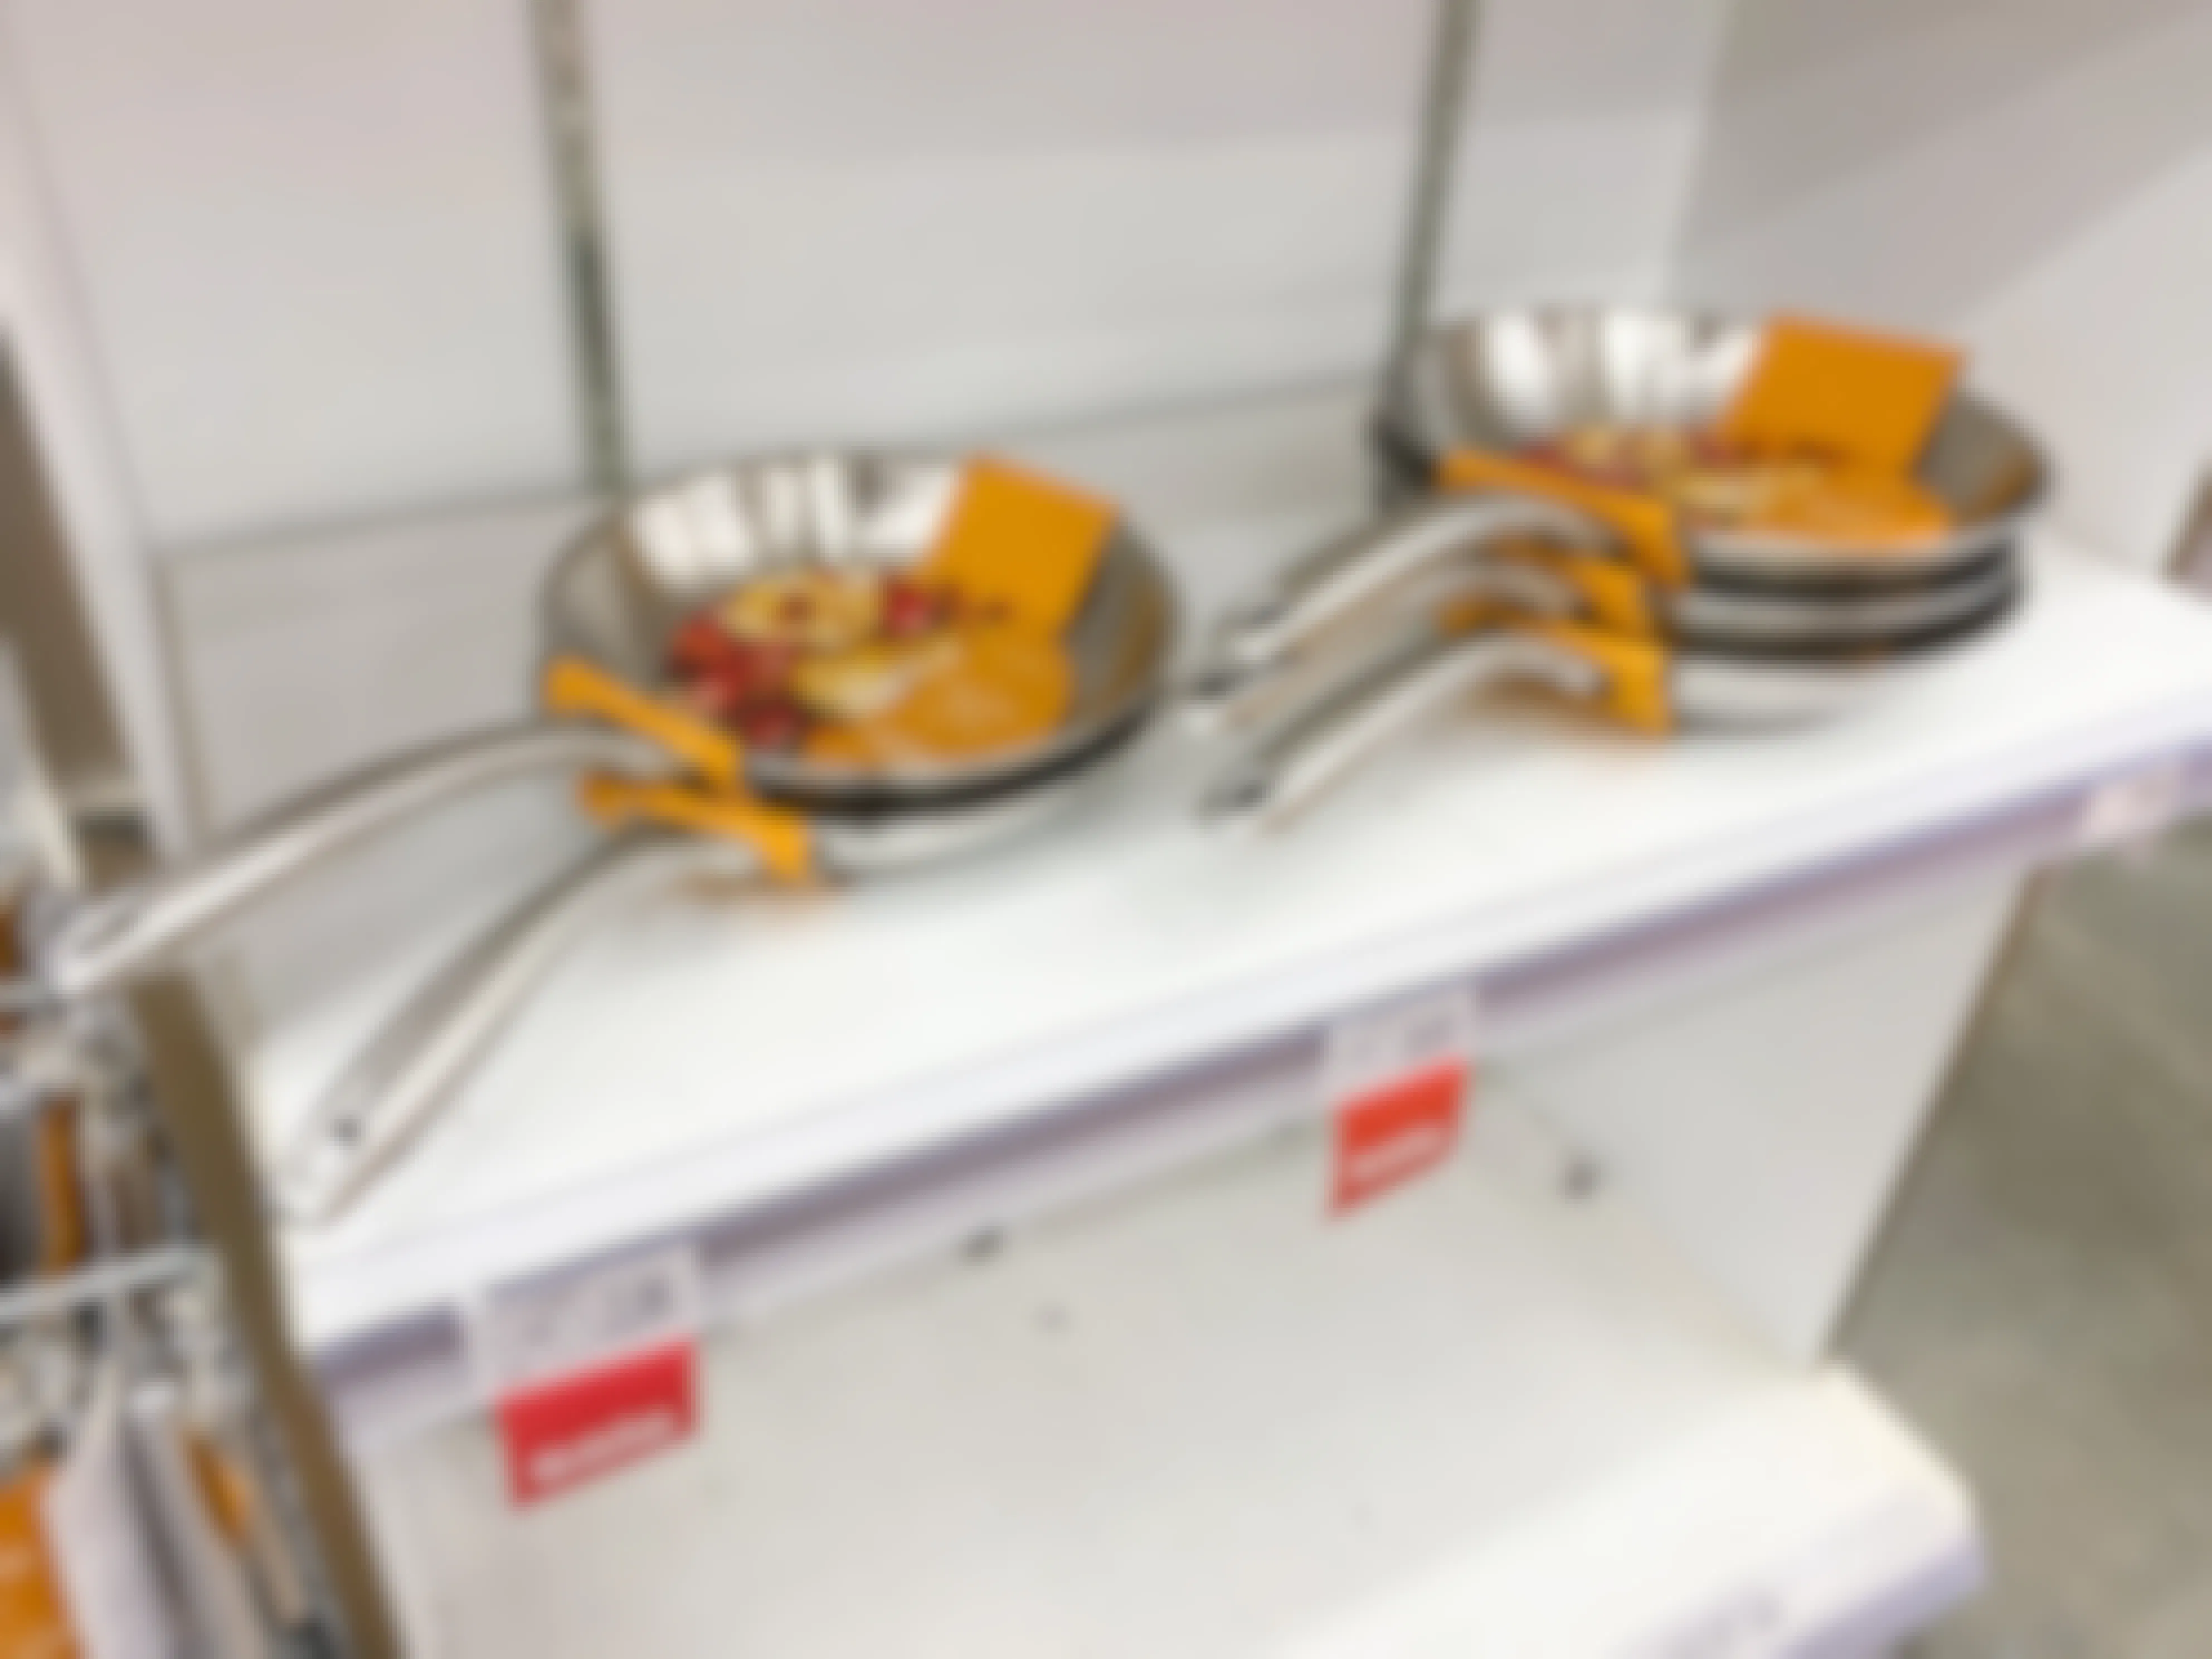 stainless steel fry pan on white shelf at angle